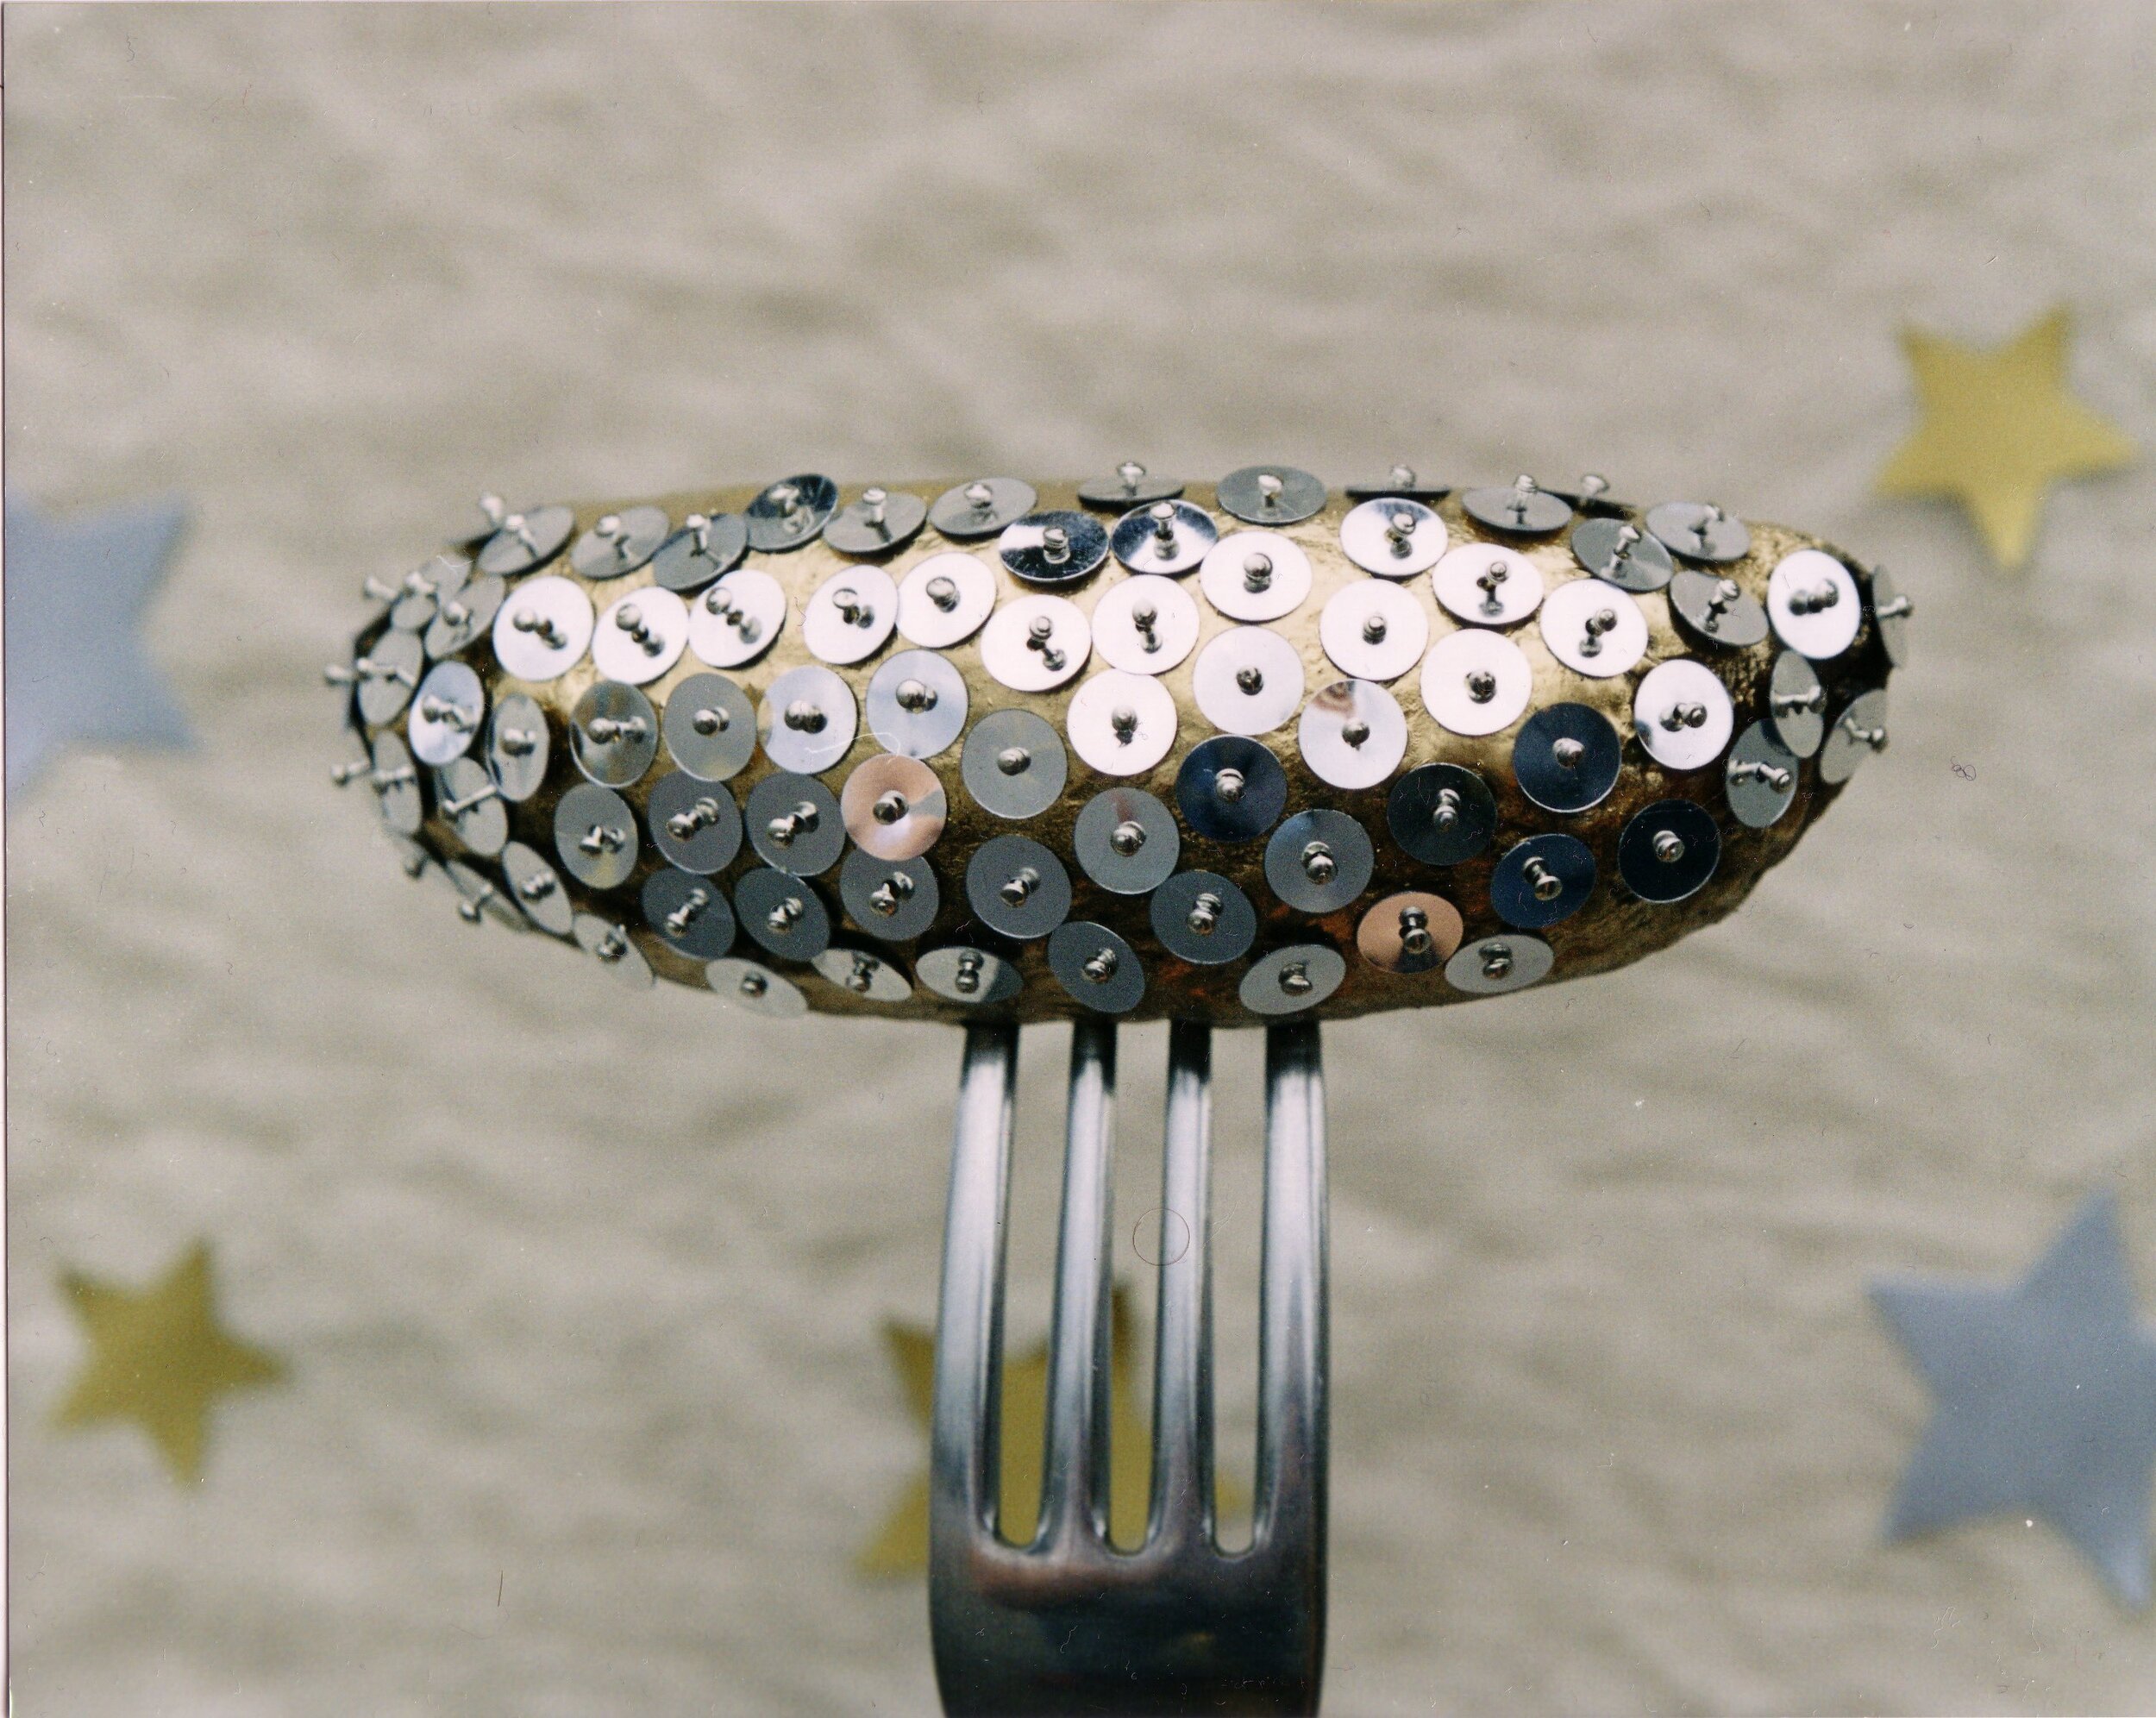 Sequinned Sausage, from the ‘Experiment in Boredom Series’, 2002